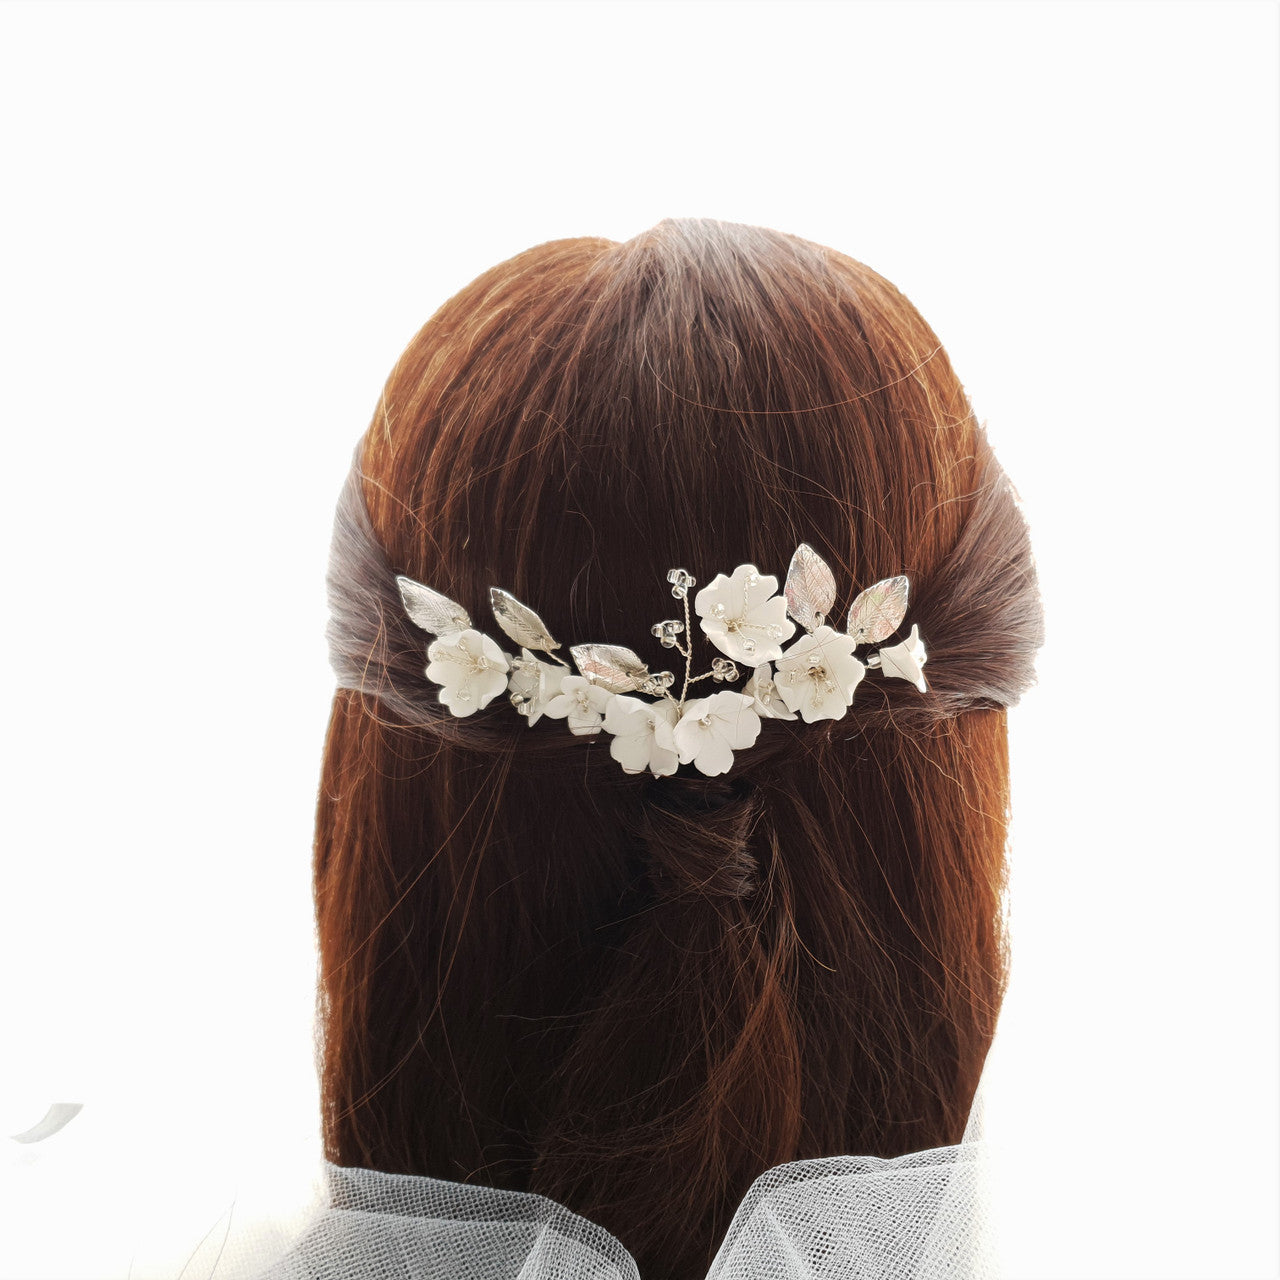 Gold Wedding Hair Pins with White Flowers-Magnolia